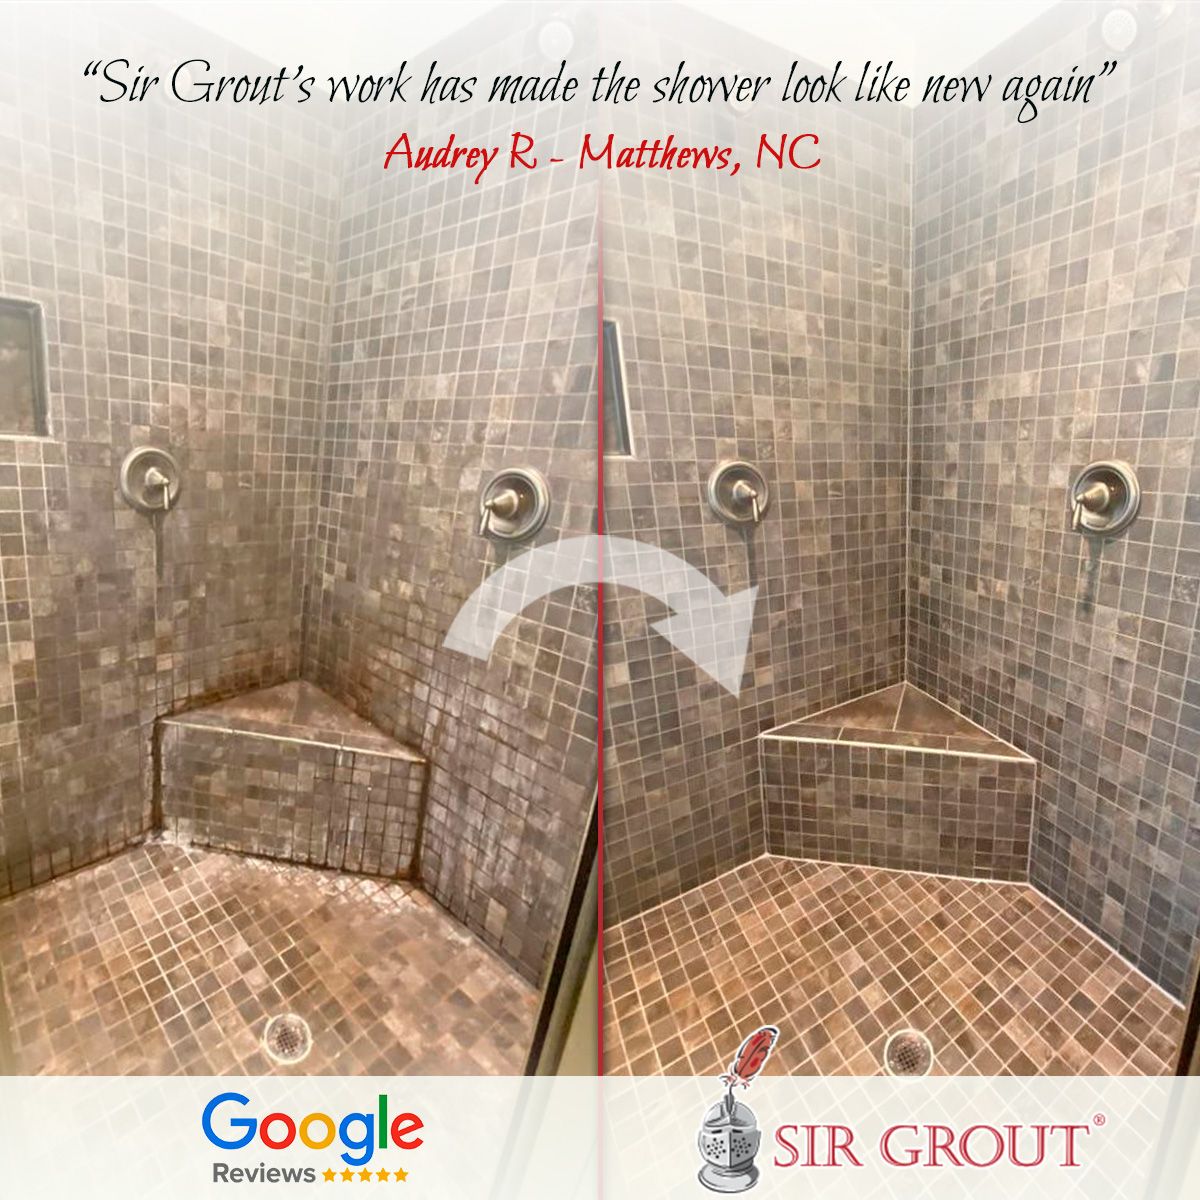 Sir Grout's work has made the shower look like new again